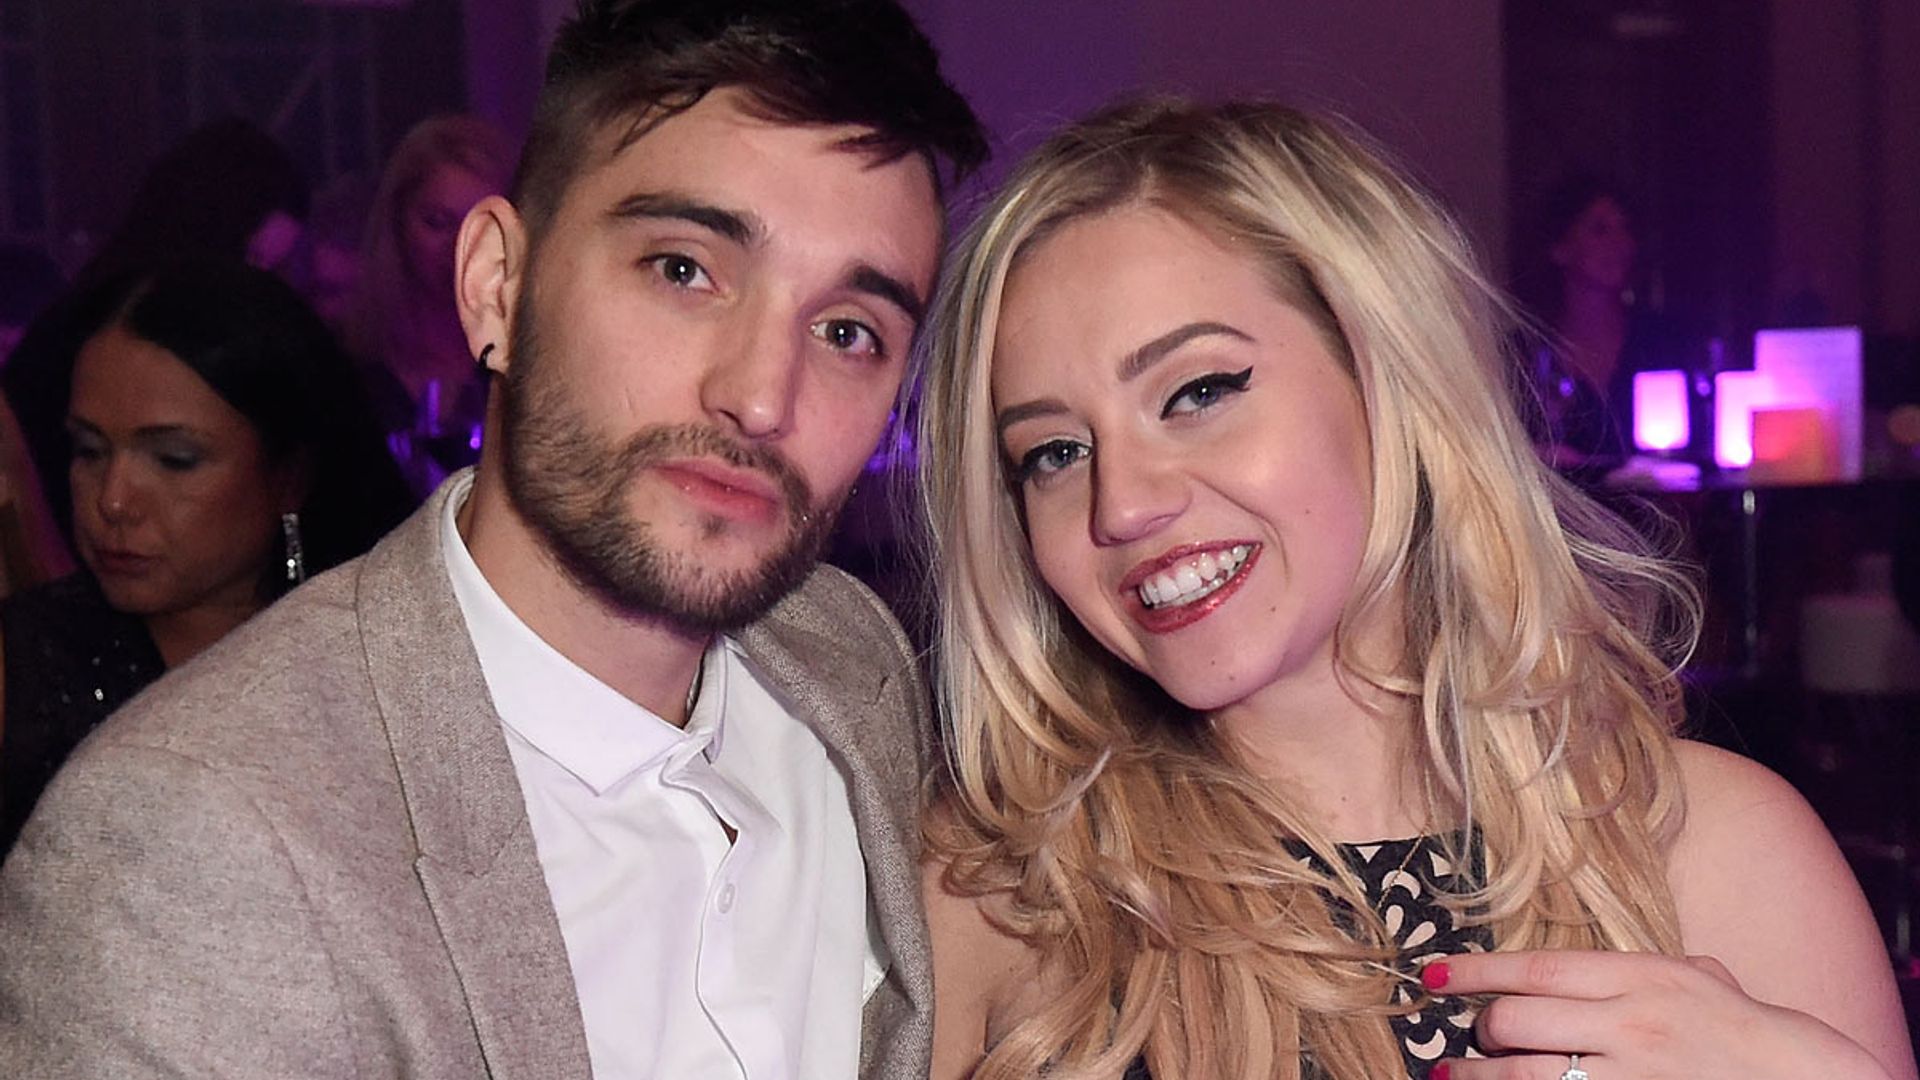 The Wanted's Tom Parker's unseen wedding video with wife Kelsey leaves fans in tears - watch